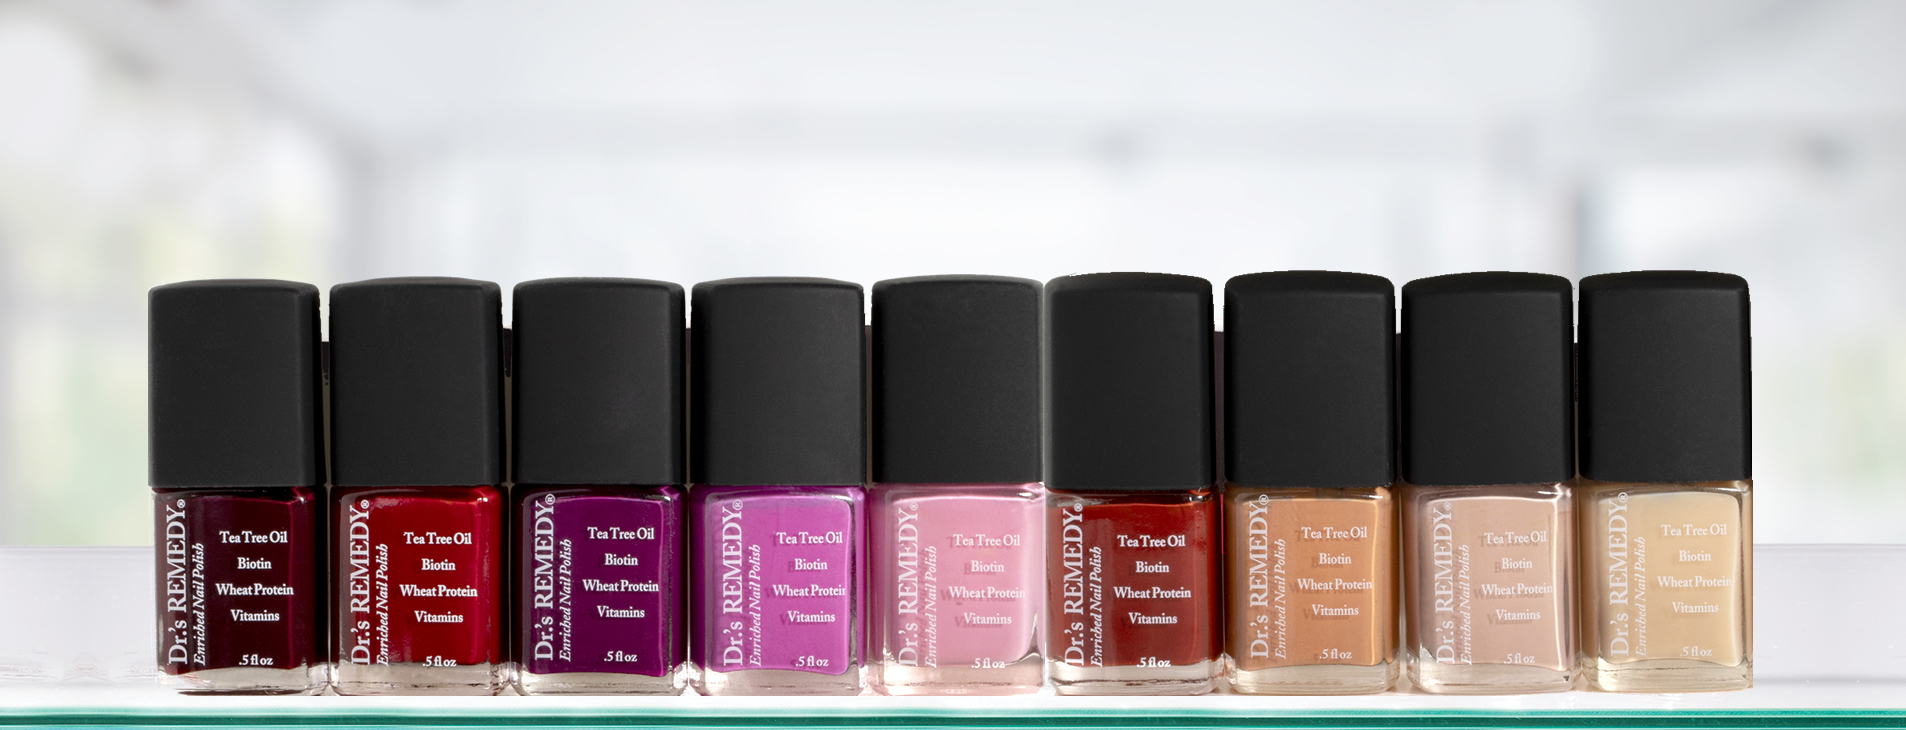 Cruelty Free & Vegan Nail Polish From Dr.'s Remedy